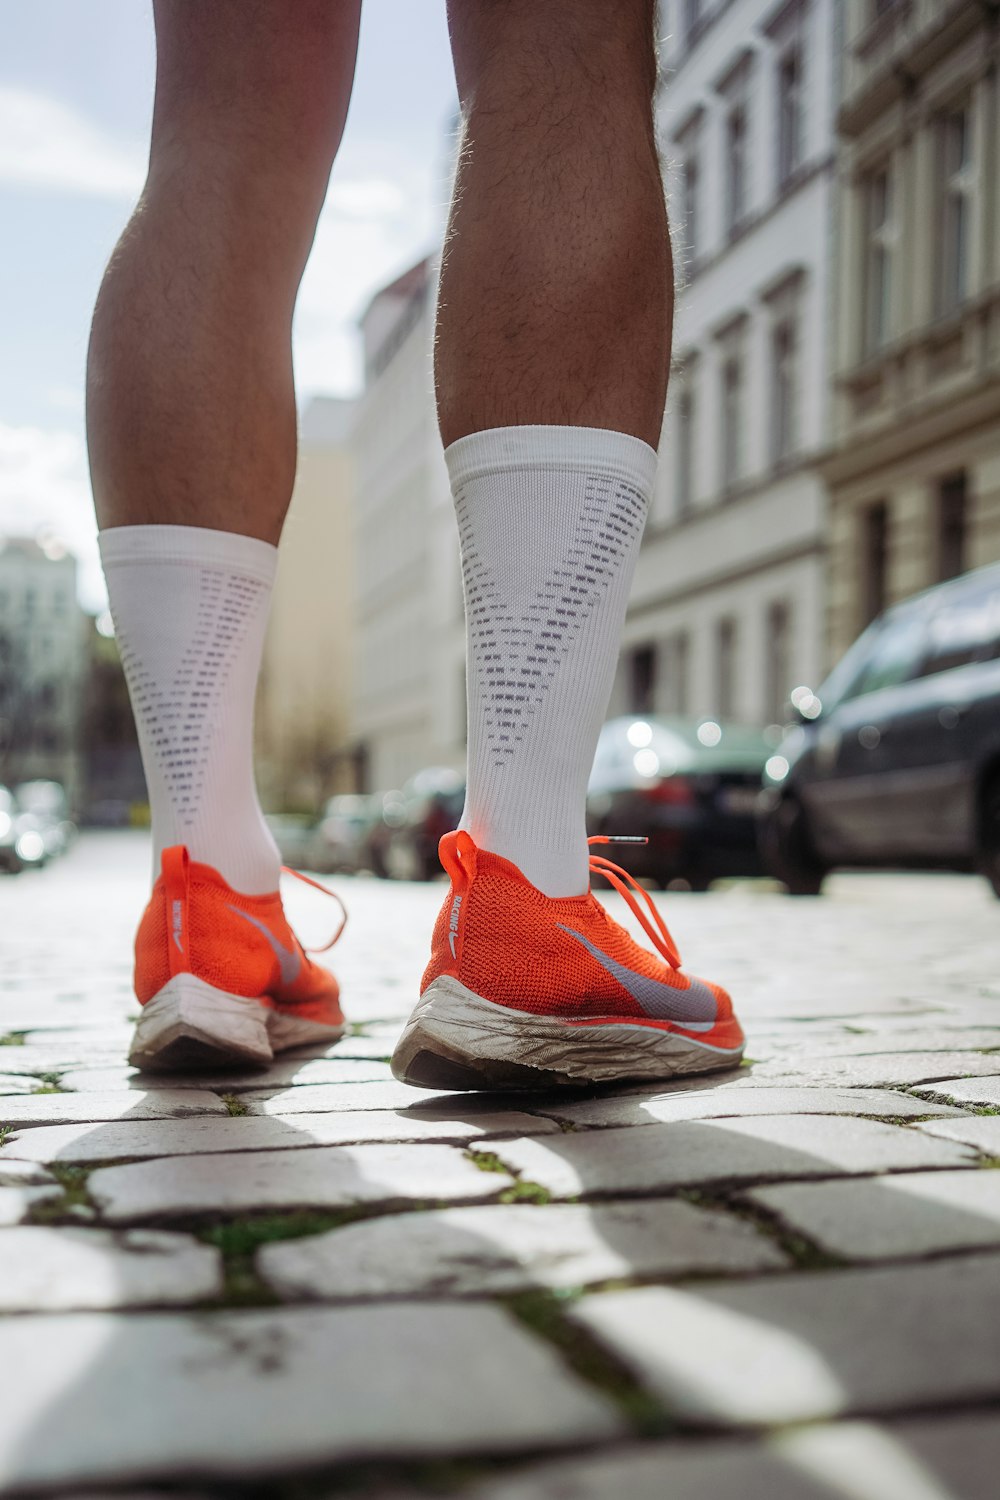 person wearing orange Nike running shoes standing on pavement